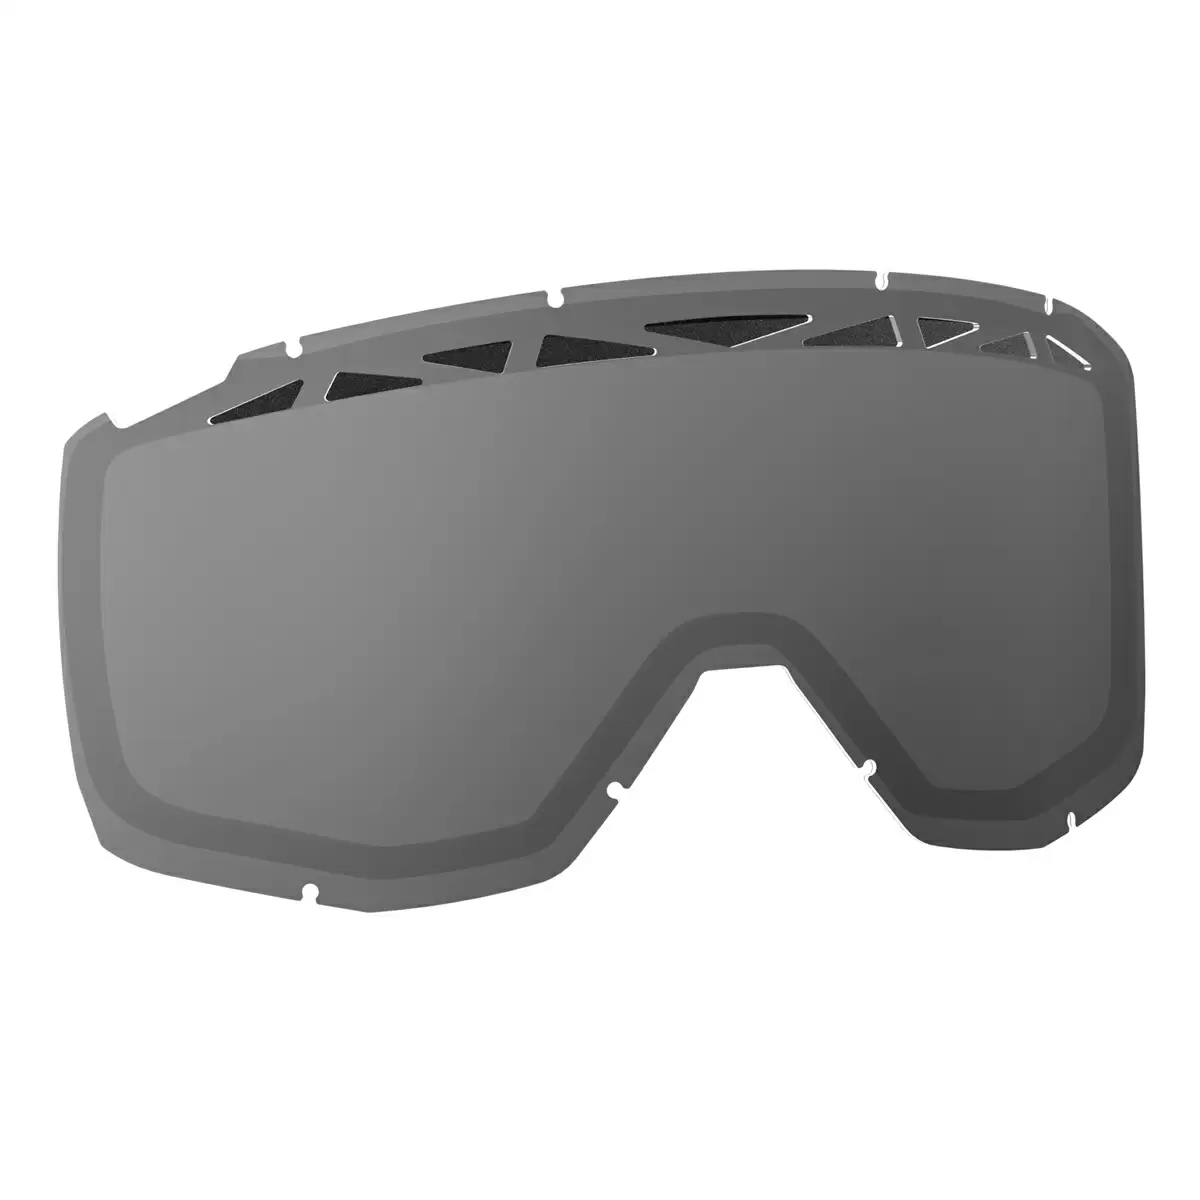 Replacement Double lens with ACS for HUSTLE/PRIMAL/SPLIT OTG/TYRANT Goggles - Grey Antifog - image